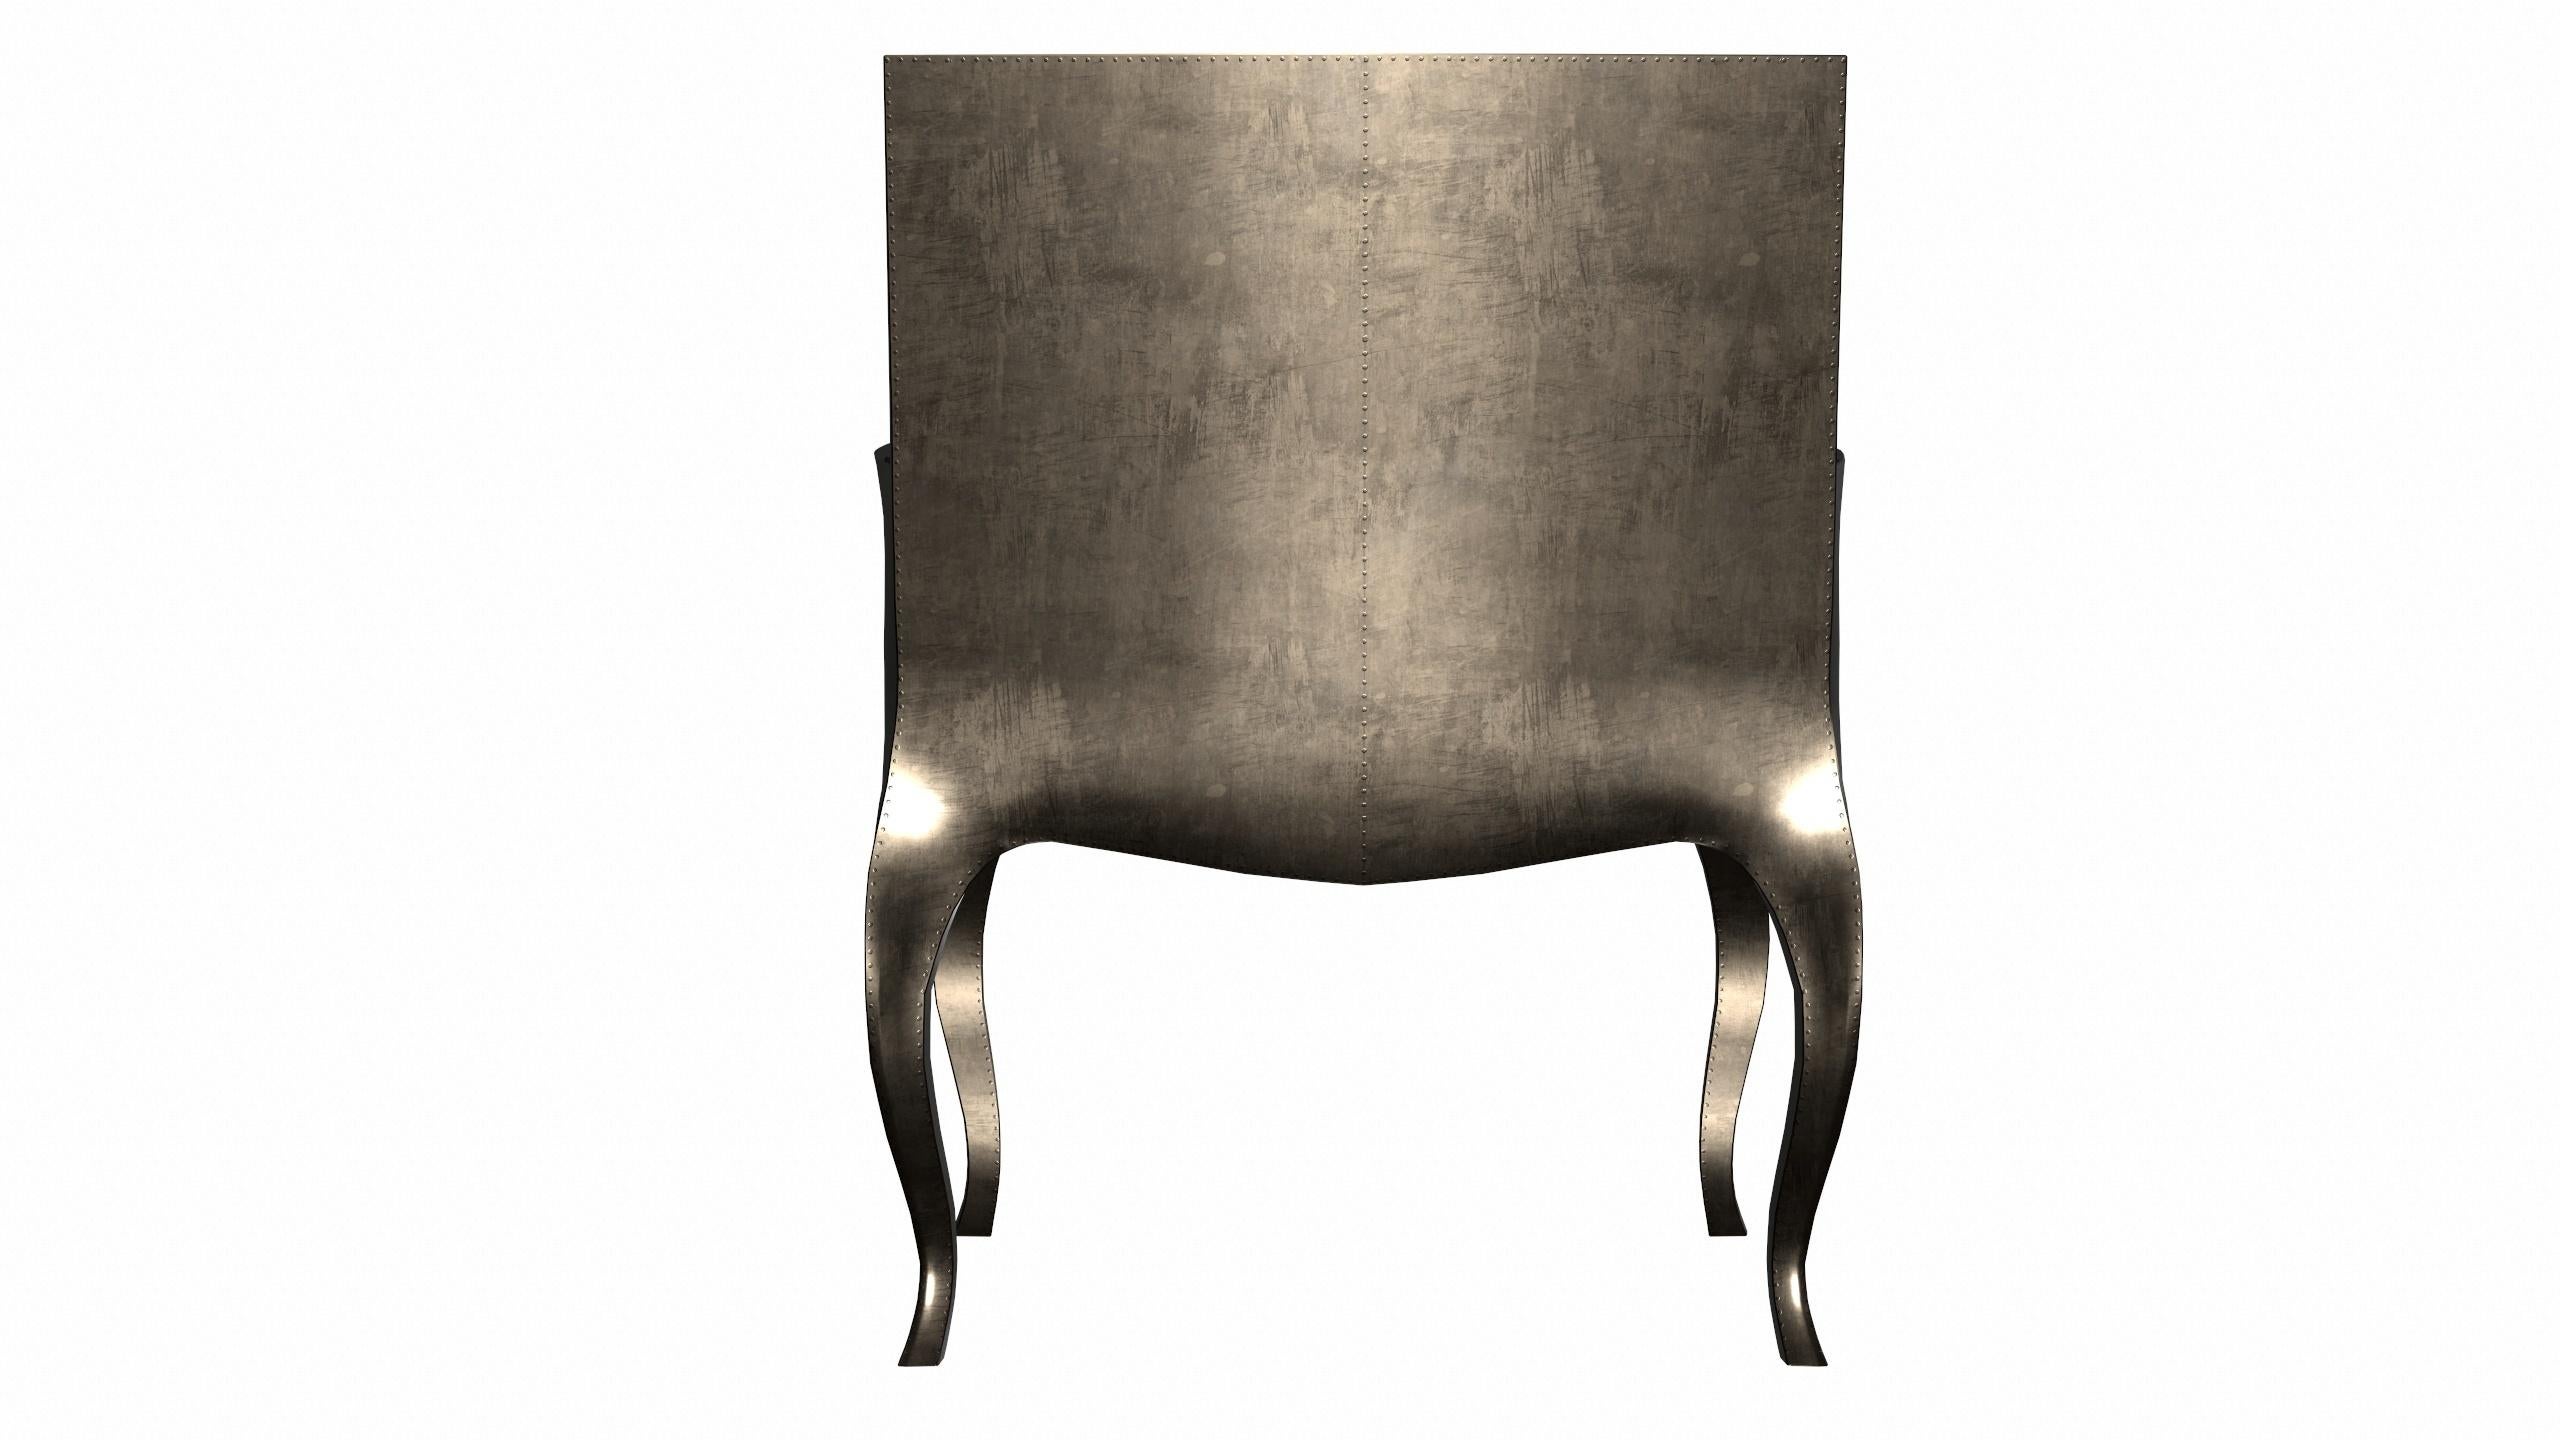 Patinated Antique Art Deco Chairs in Smooth Antique by Paul Mathieu for S. Odegard For Sale